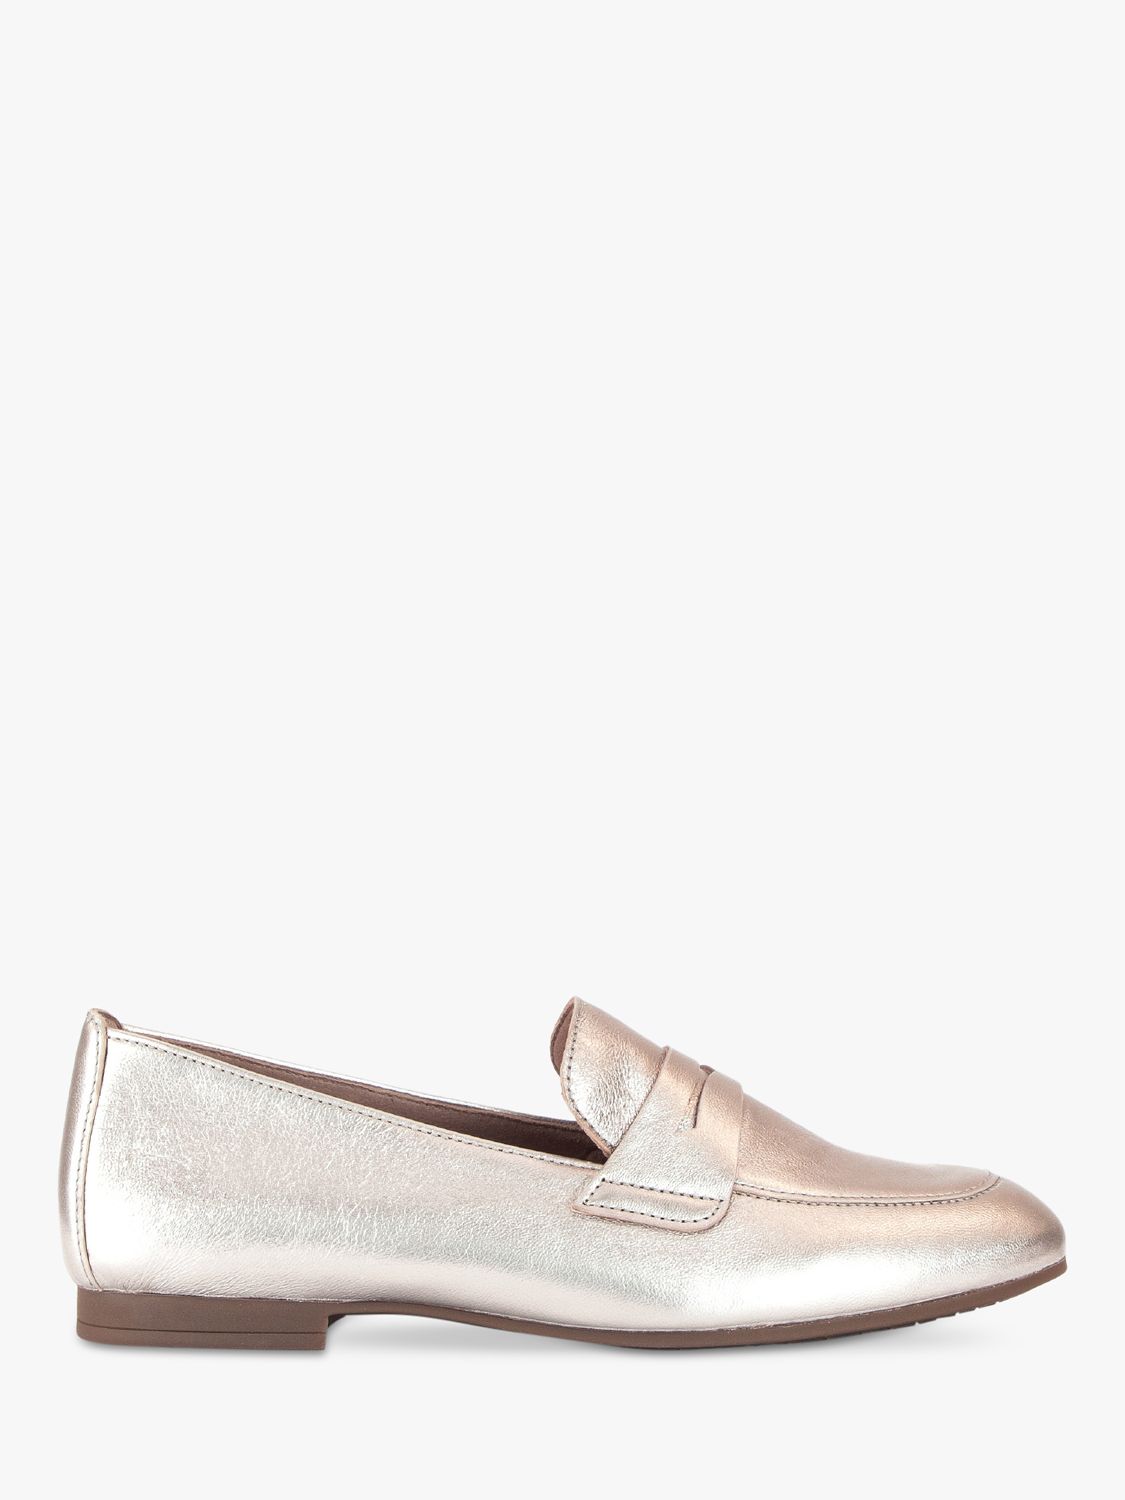 Gabor Viva Leather Loafers, Gold at John Lewis & Partners